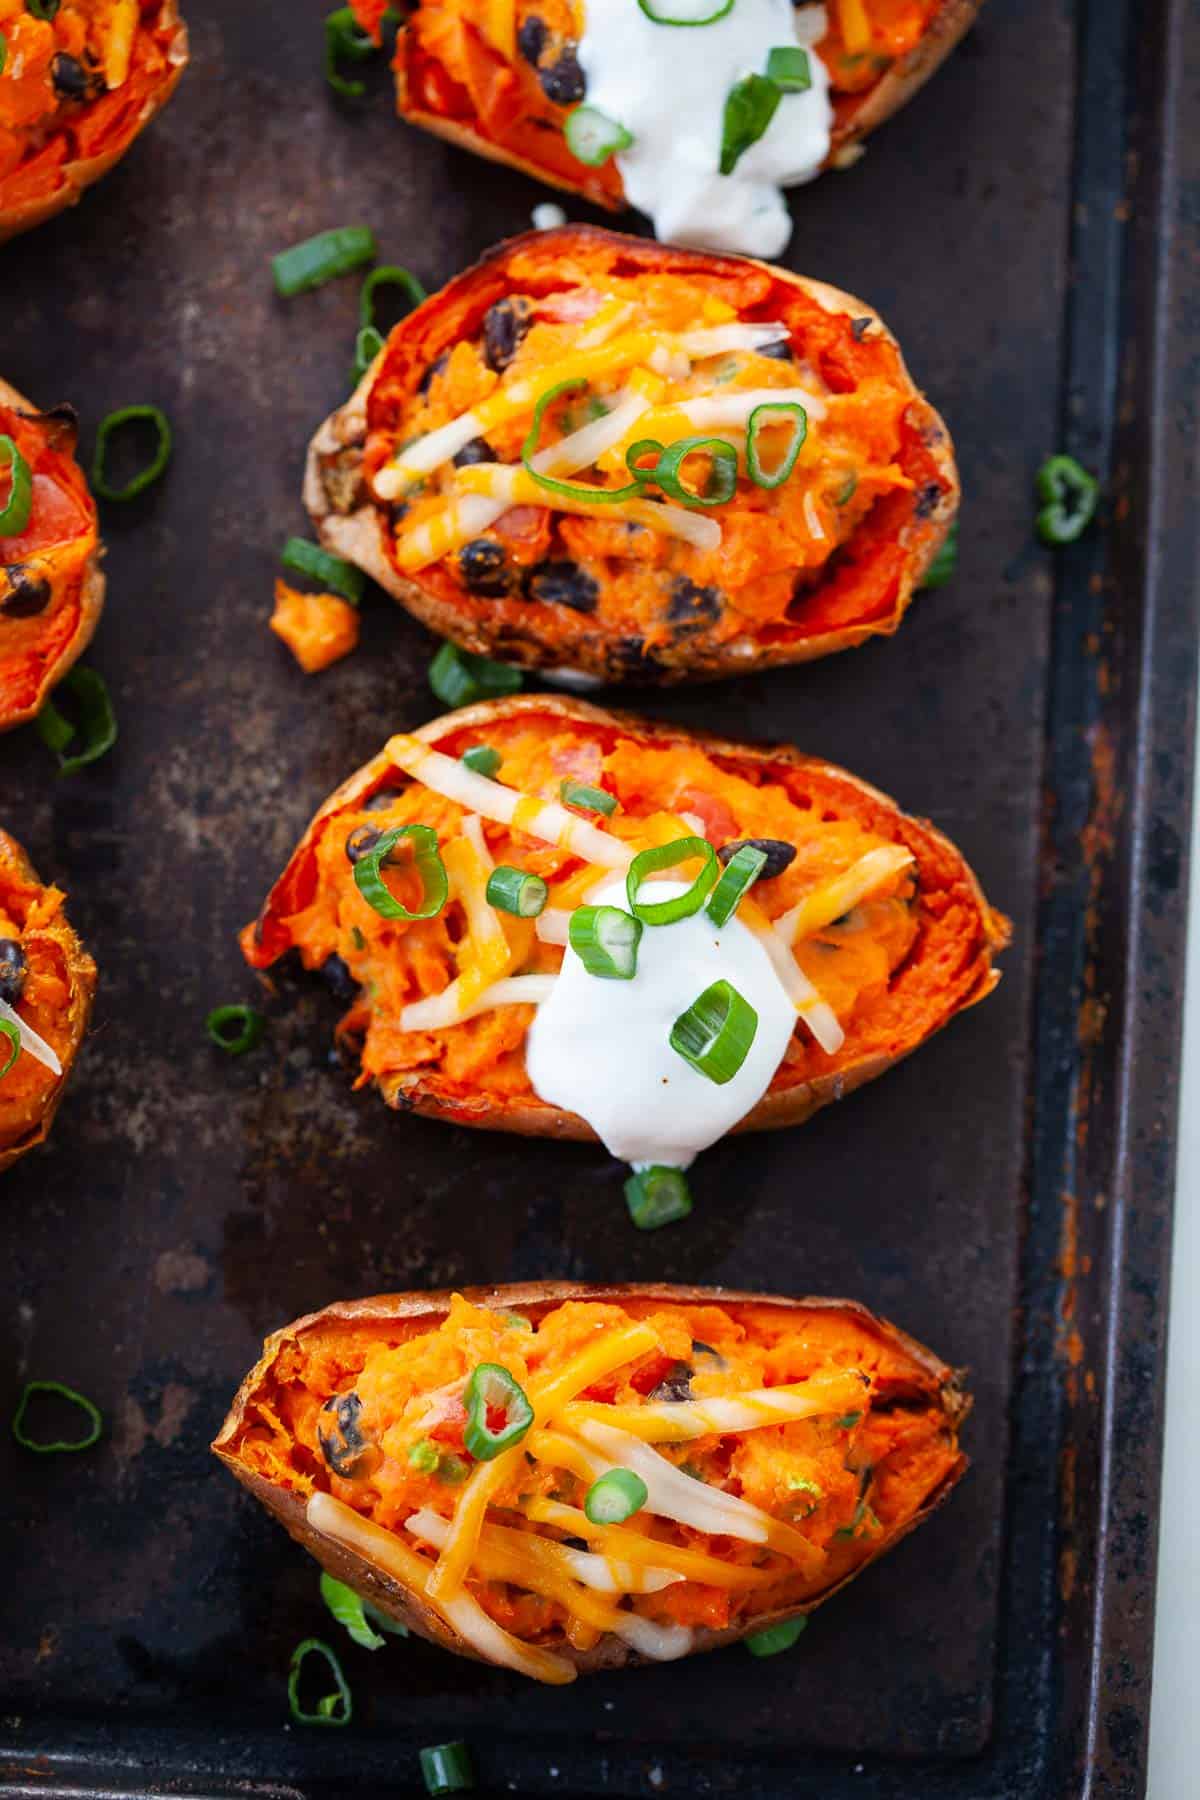 Sweet potato skins with black beans, green onions, vegan shredded cheese, and vegan sour cream.